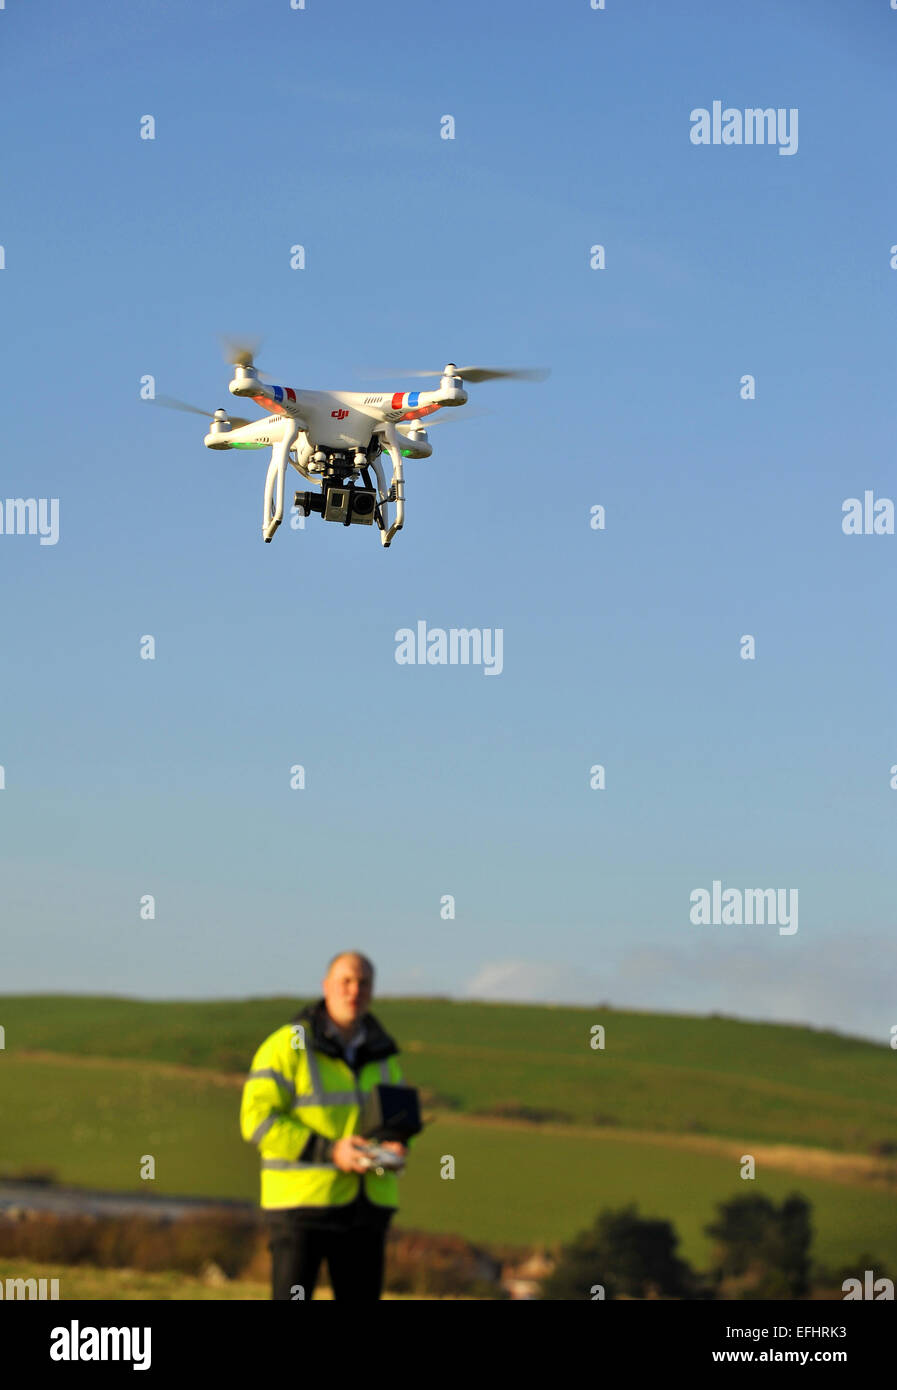 Drone camera in flight, Unmanned Aerial Vehicle, UAV or Drone, aerial photography or filming Stock Photo